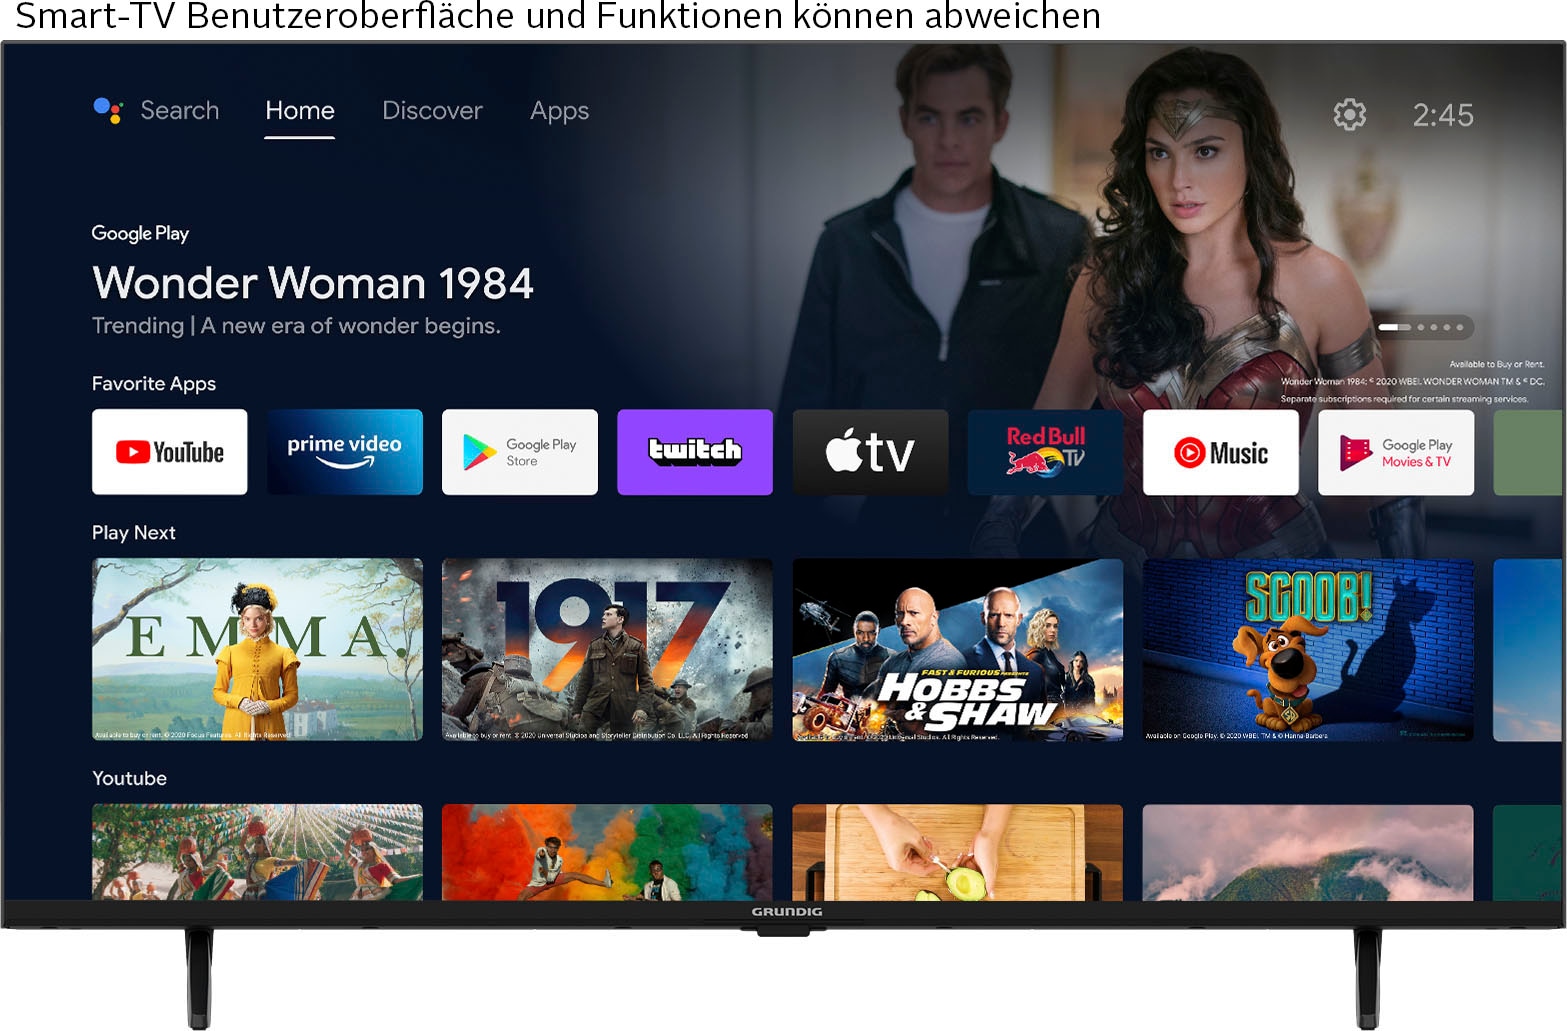 LED-Fernseher »40 VOE 631 BR1T00«, 100 cm/40 Zoll, Full HD, Android TV-Smart-TV